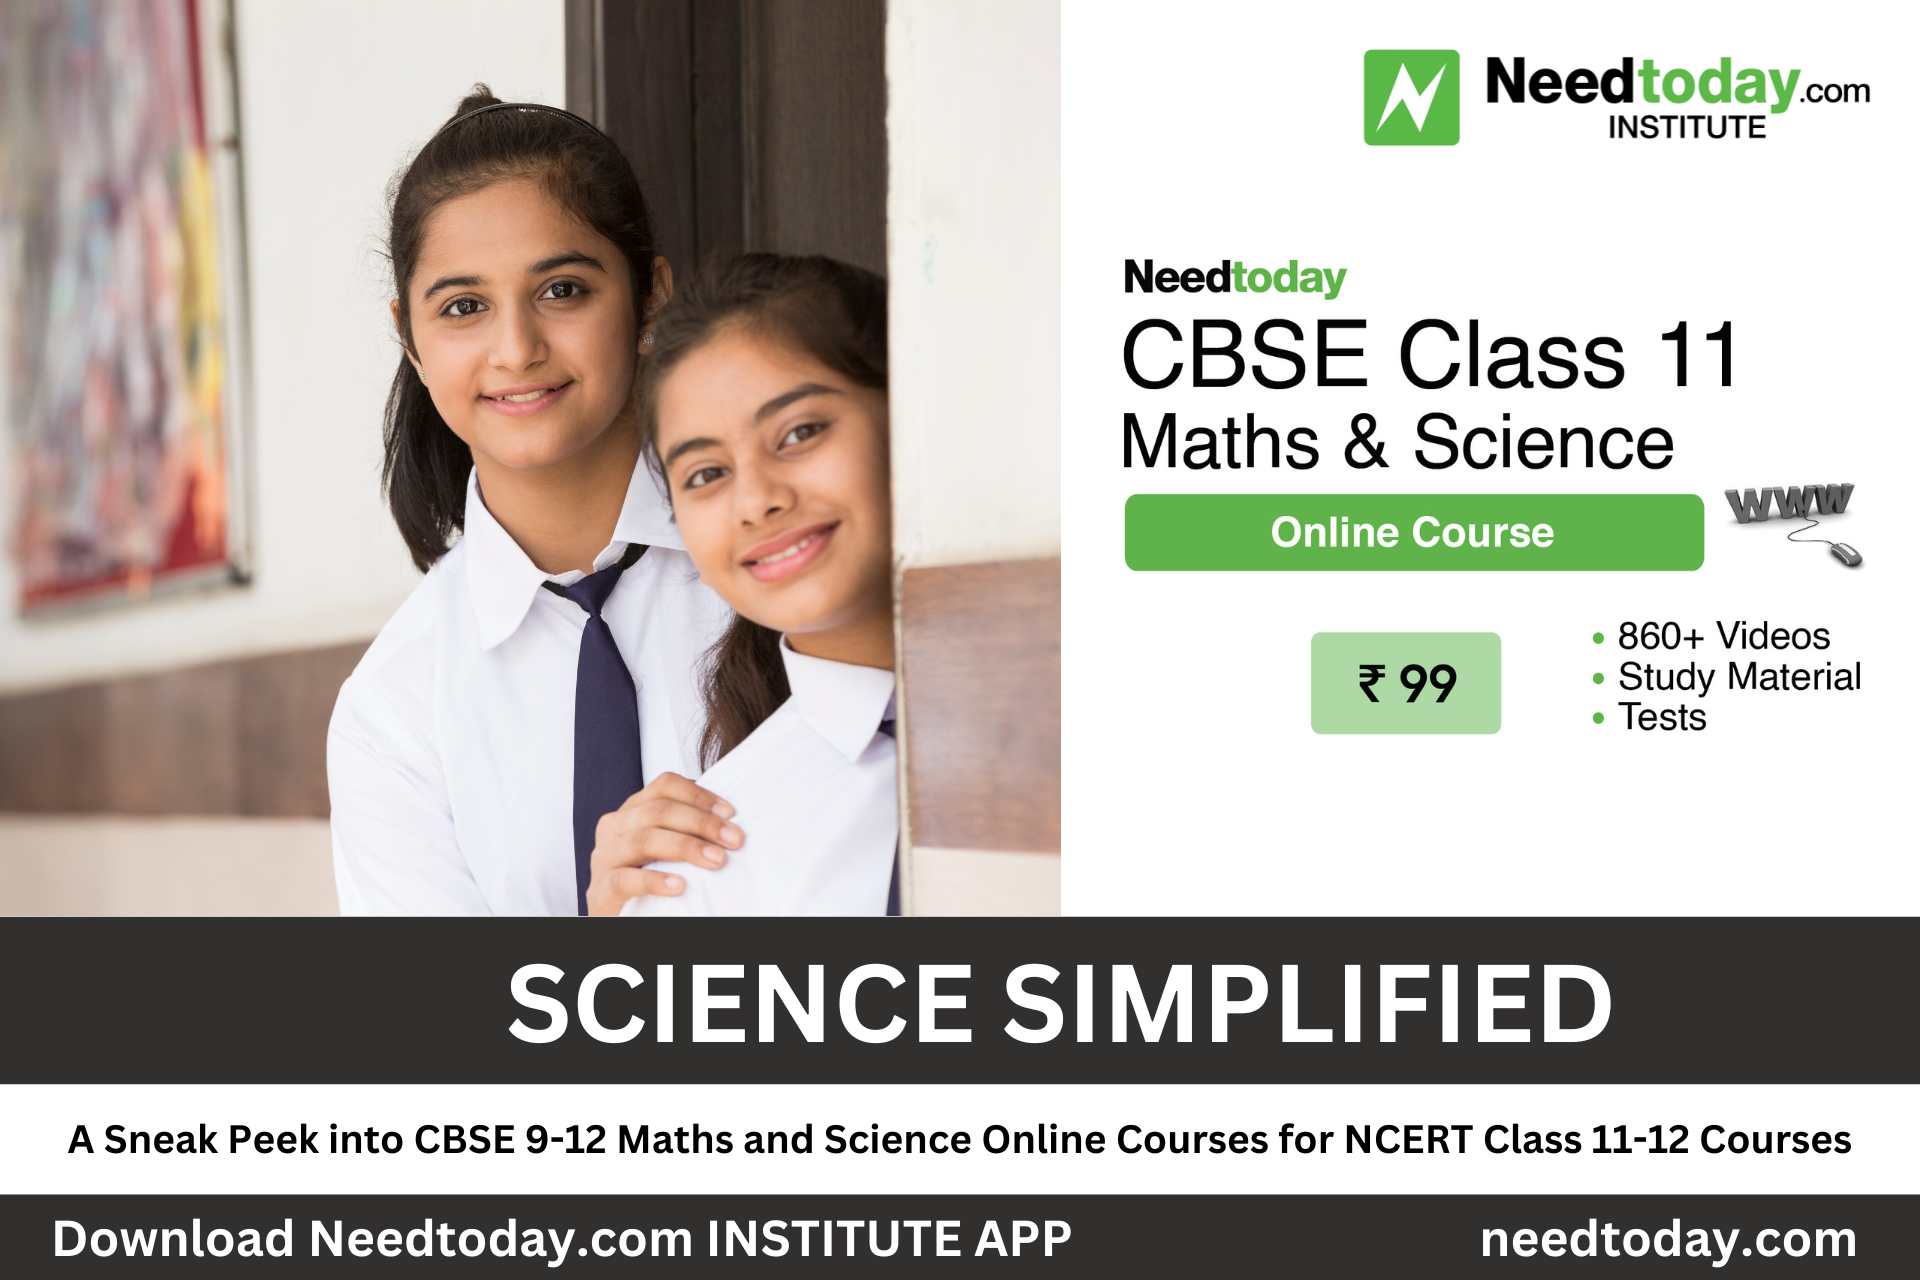 Science Simplified: A Sneak Peek into CBSE 9-12 Math and Science Online Courses for NCERT Class 11-12 Courses